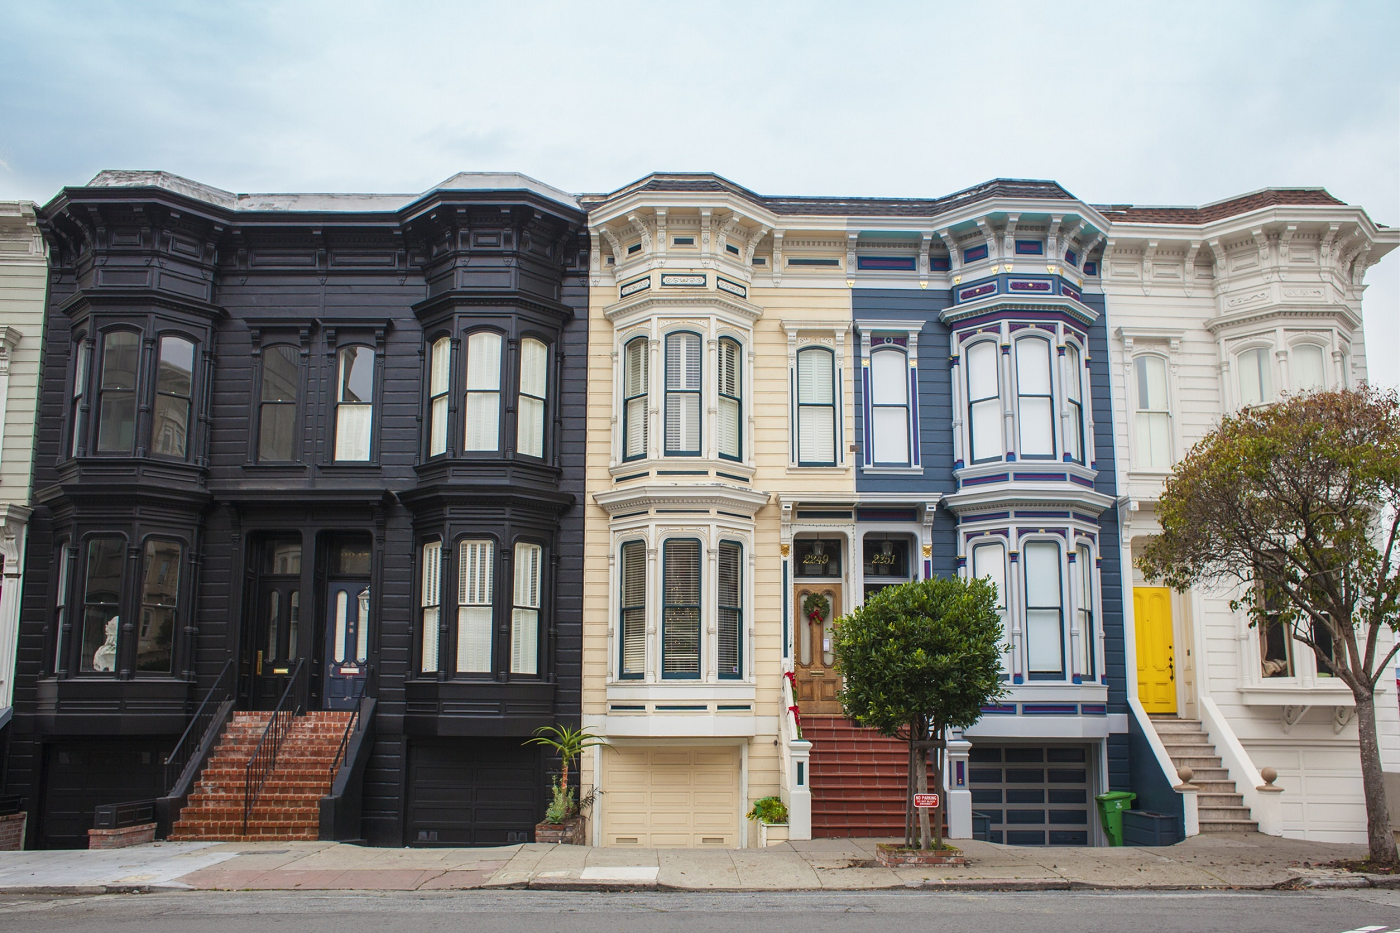 Choosing the Best Neighborhood to Purchase Real Estate